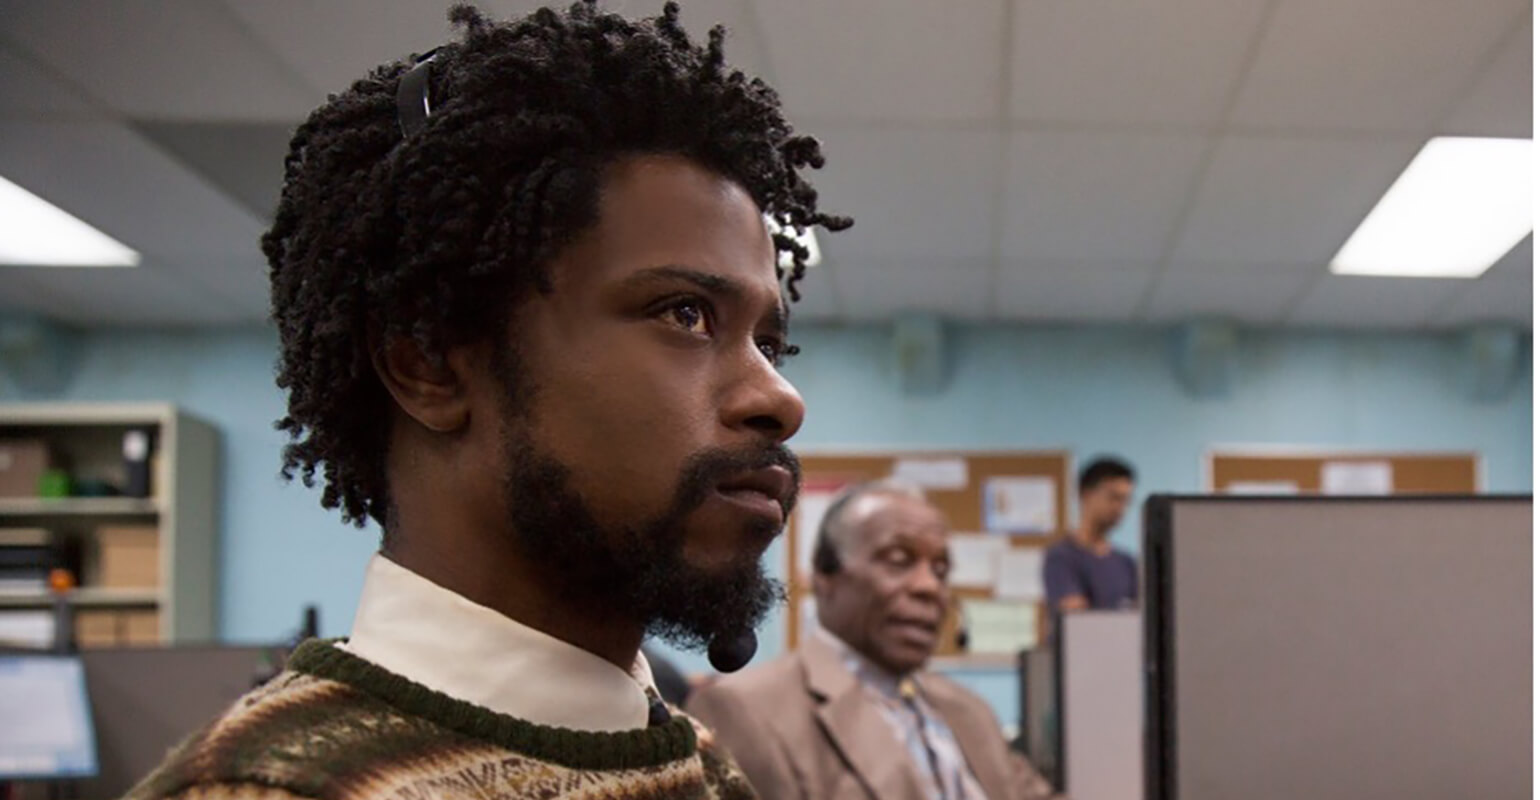 An image of actor LaKeith Stanfield in the movie “Sorry to Bother You.” He is sitting in a call center looking into the distance. Behind him are coworkers that appear to be taking calls for their employer. The movie is an absurdist comedy that heavily features a theme of code-switching.